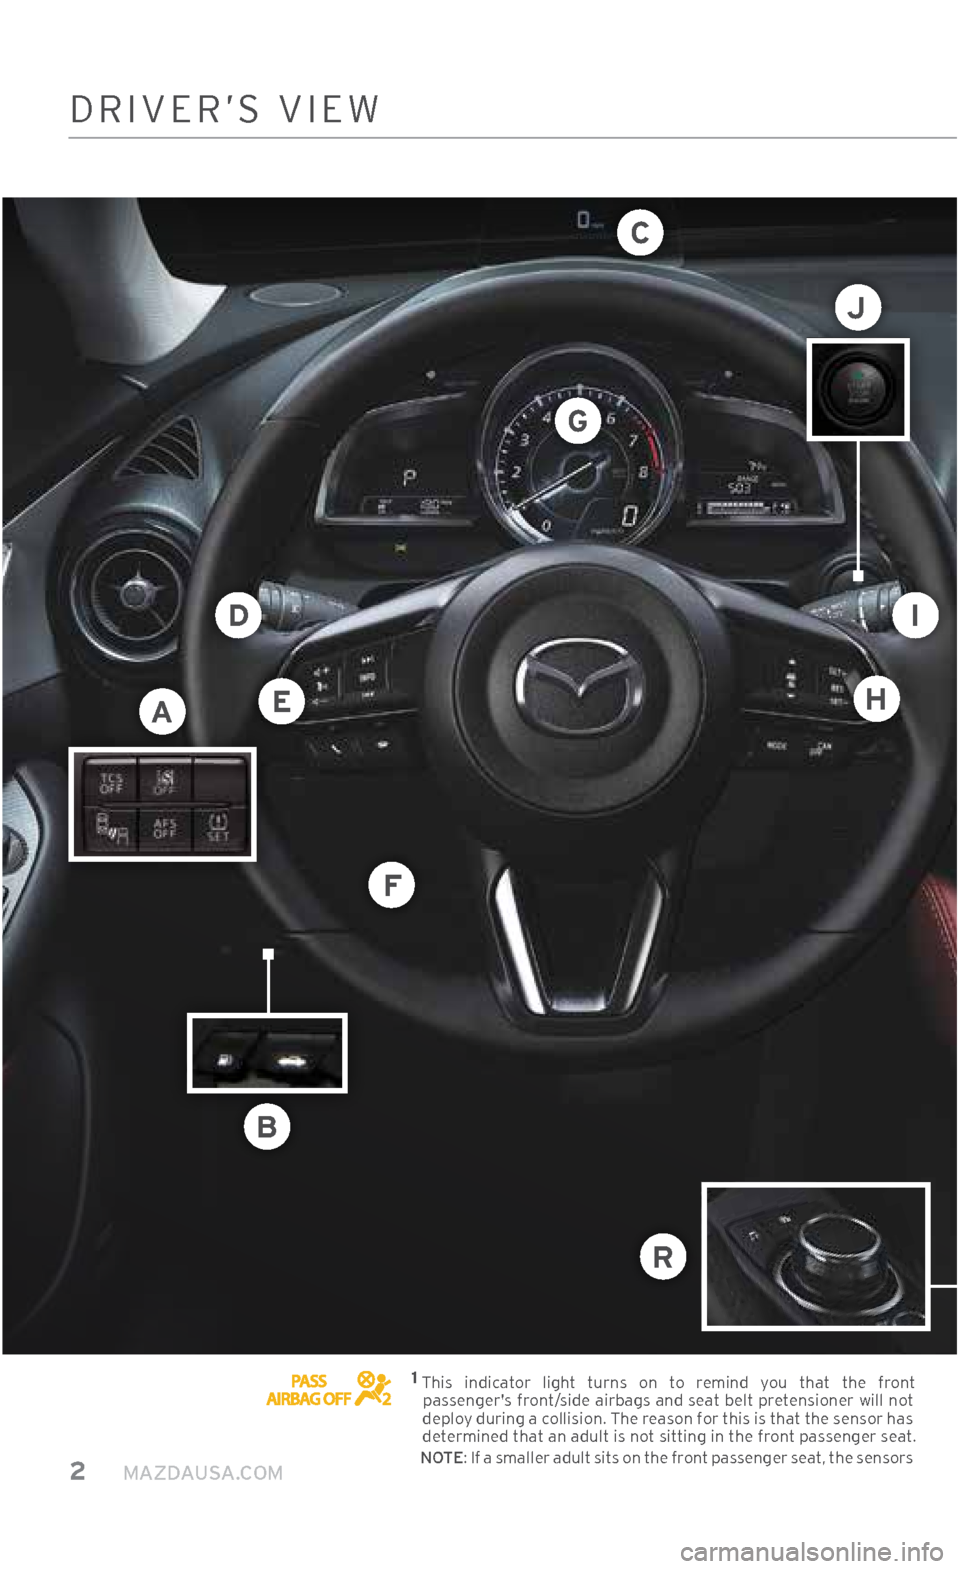 MAZDA MODEL CX-3 2018  Smart Start Guide (in English) 2     MAZDAUSA.COM
A
B
DRIVER’\f VIEW
DI
G
H
F
E
J
R
C
1  This  indicator  light  turns  on  to  remind  you  that  the  front 
passengers front/side airbags and seat belt pretensioner will not 
de